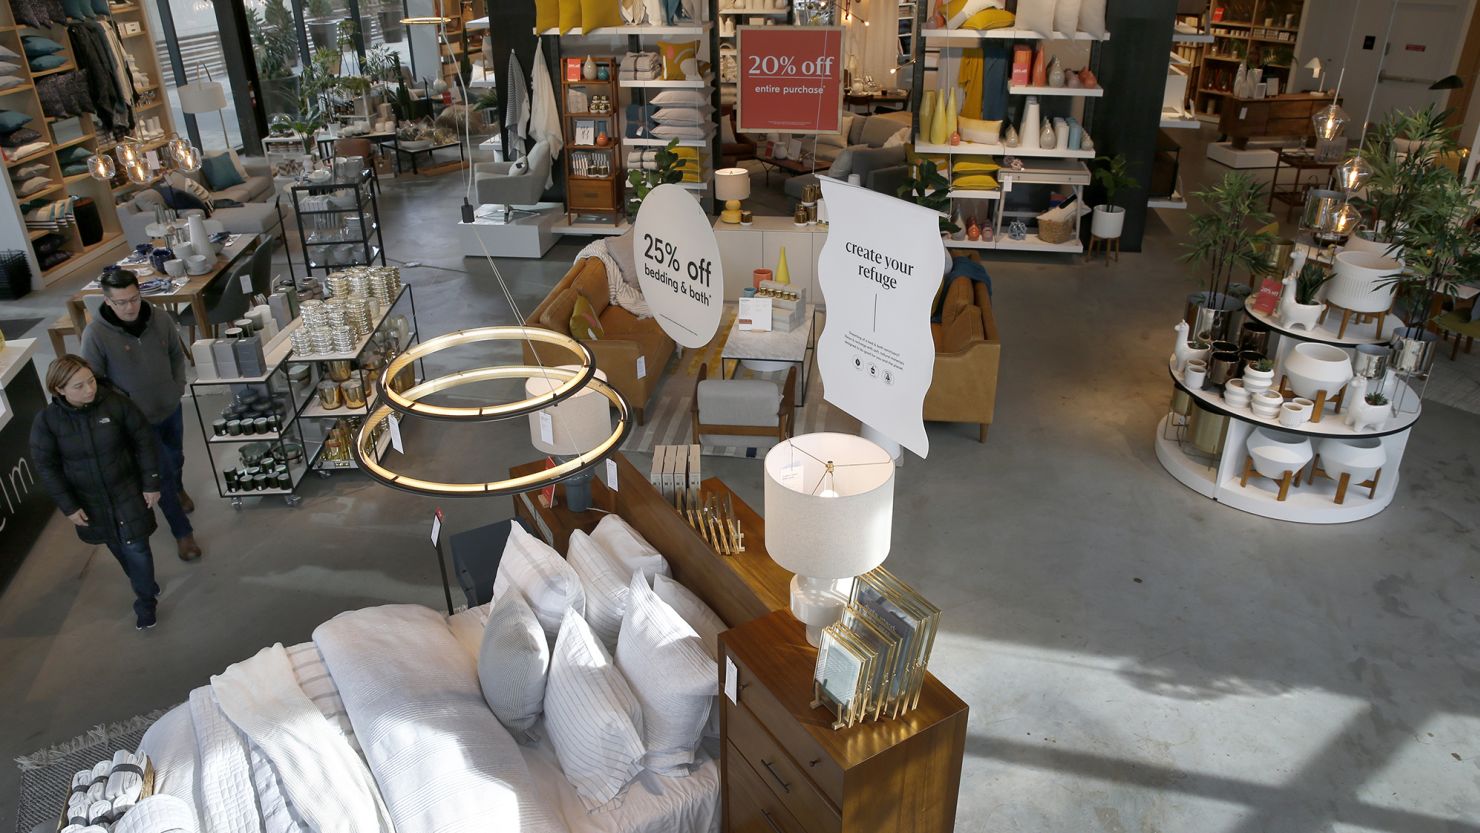 Customers shop at a new West Elm store at the Hillsdale Shopping Center in San Mateo, California.